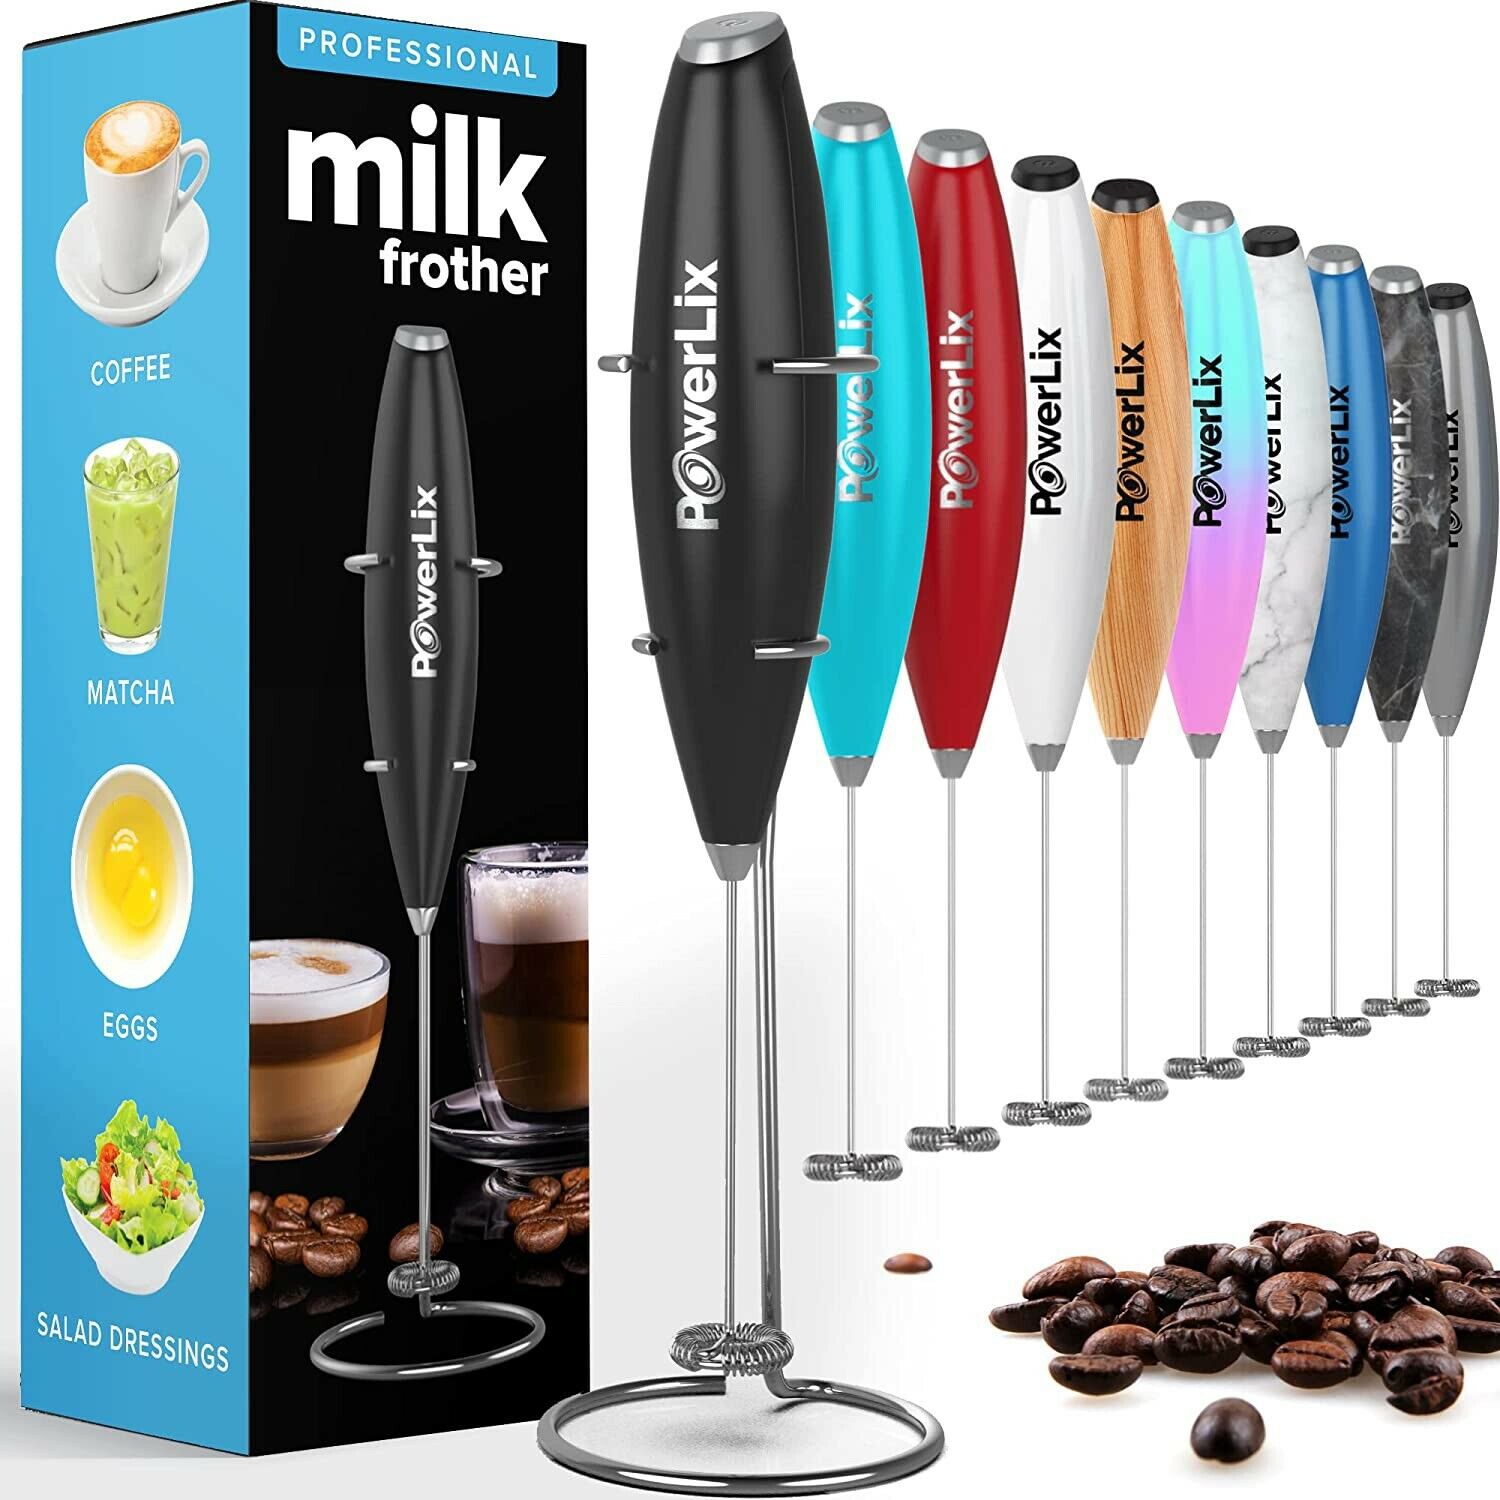 PowerLix Milk Frother Handheld Battery Operated Electric Whisk Foam Maker Coffee